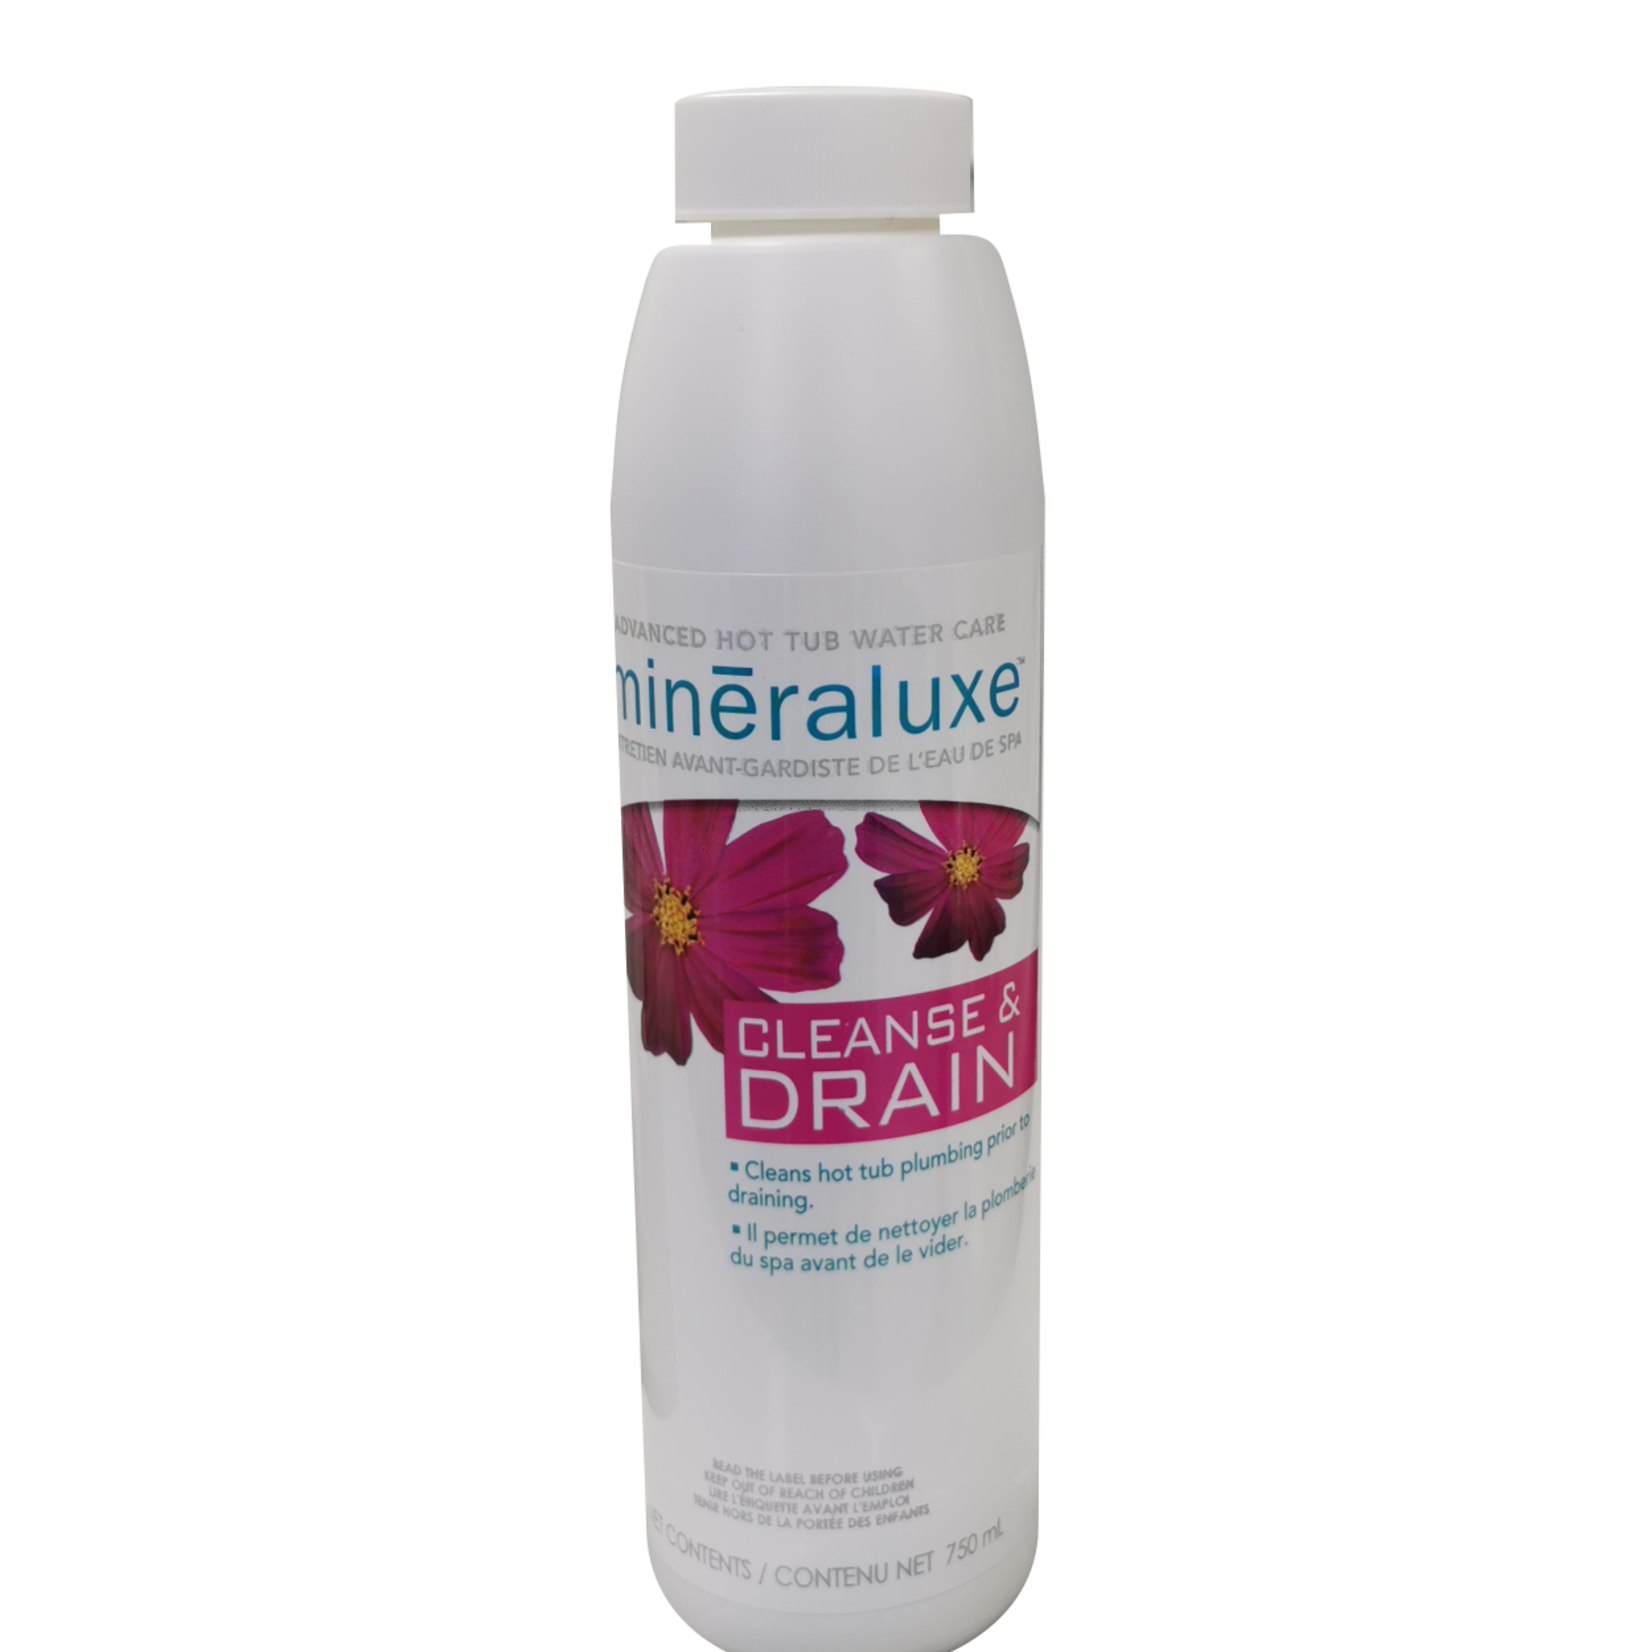 Mineraluxe Cleanse & Drain (750 mL)